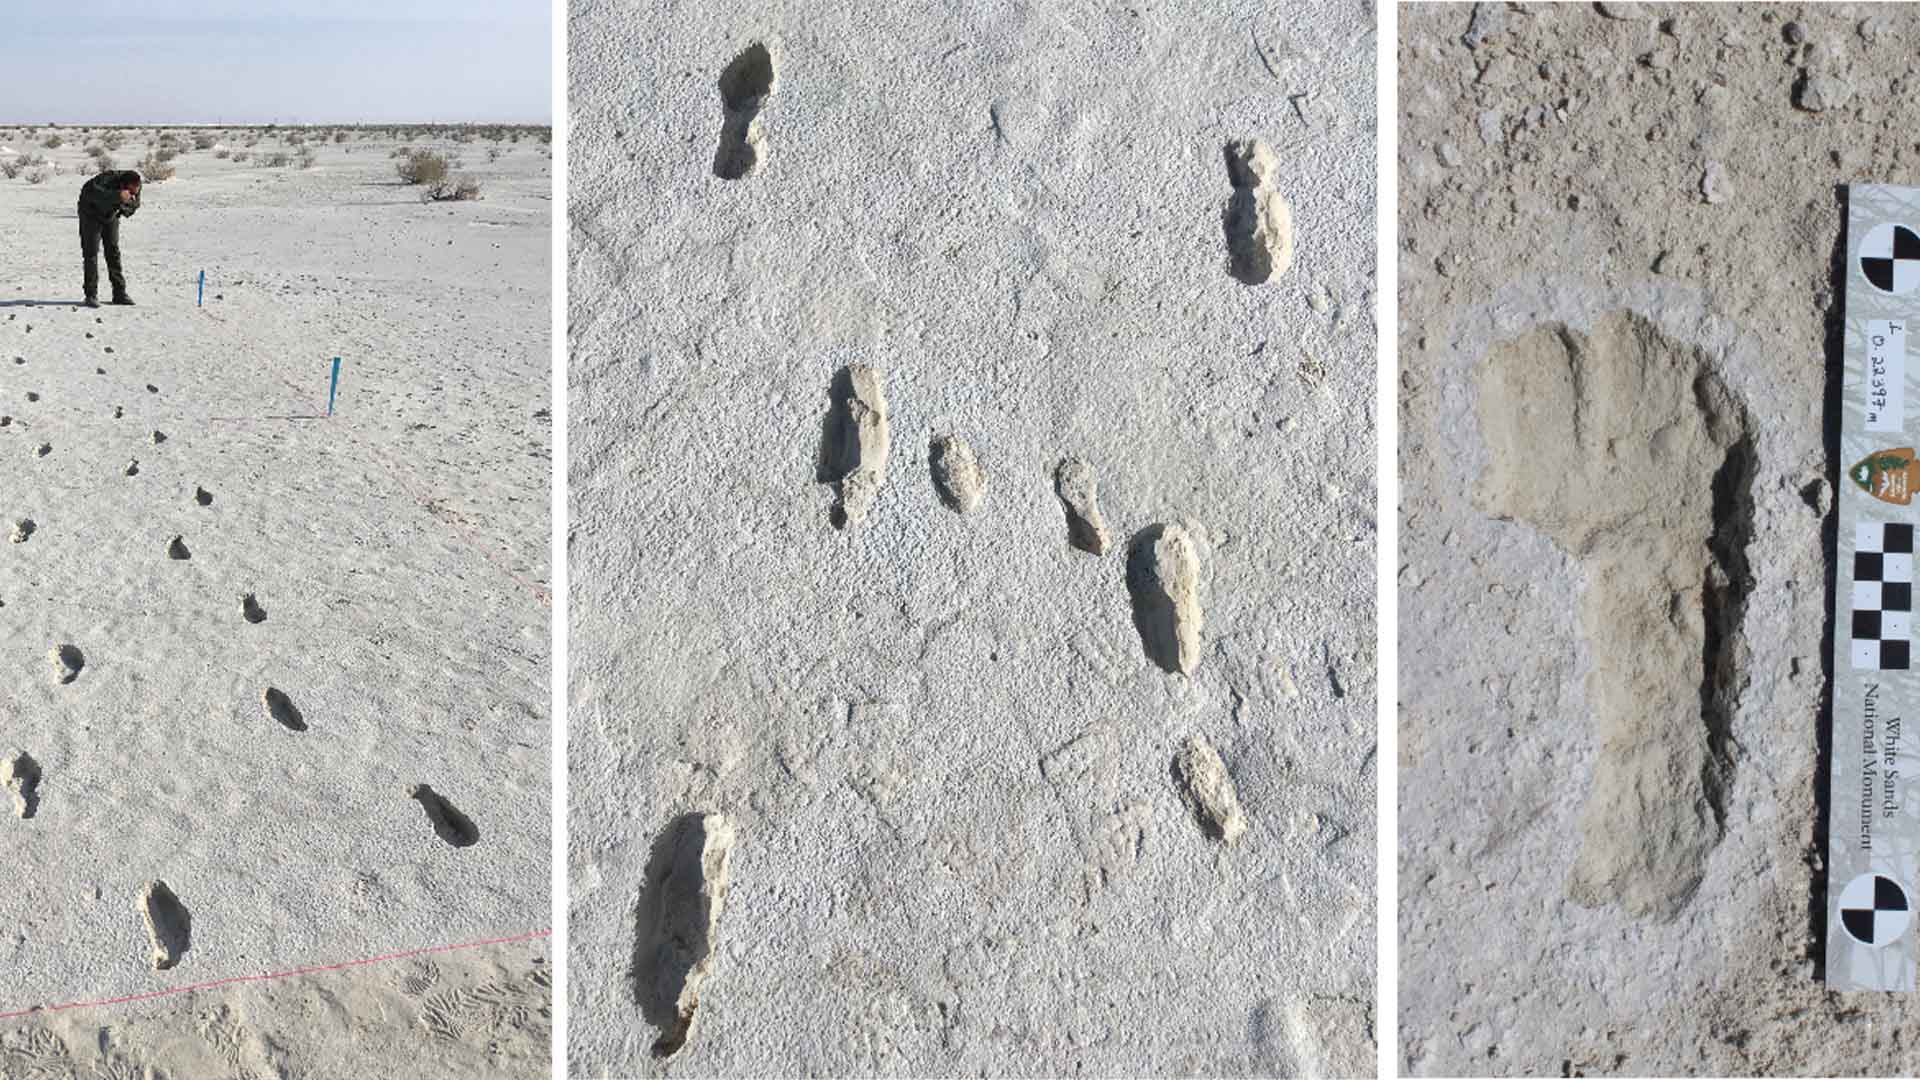 Adult and children footprints in White Sands National Park